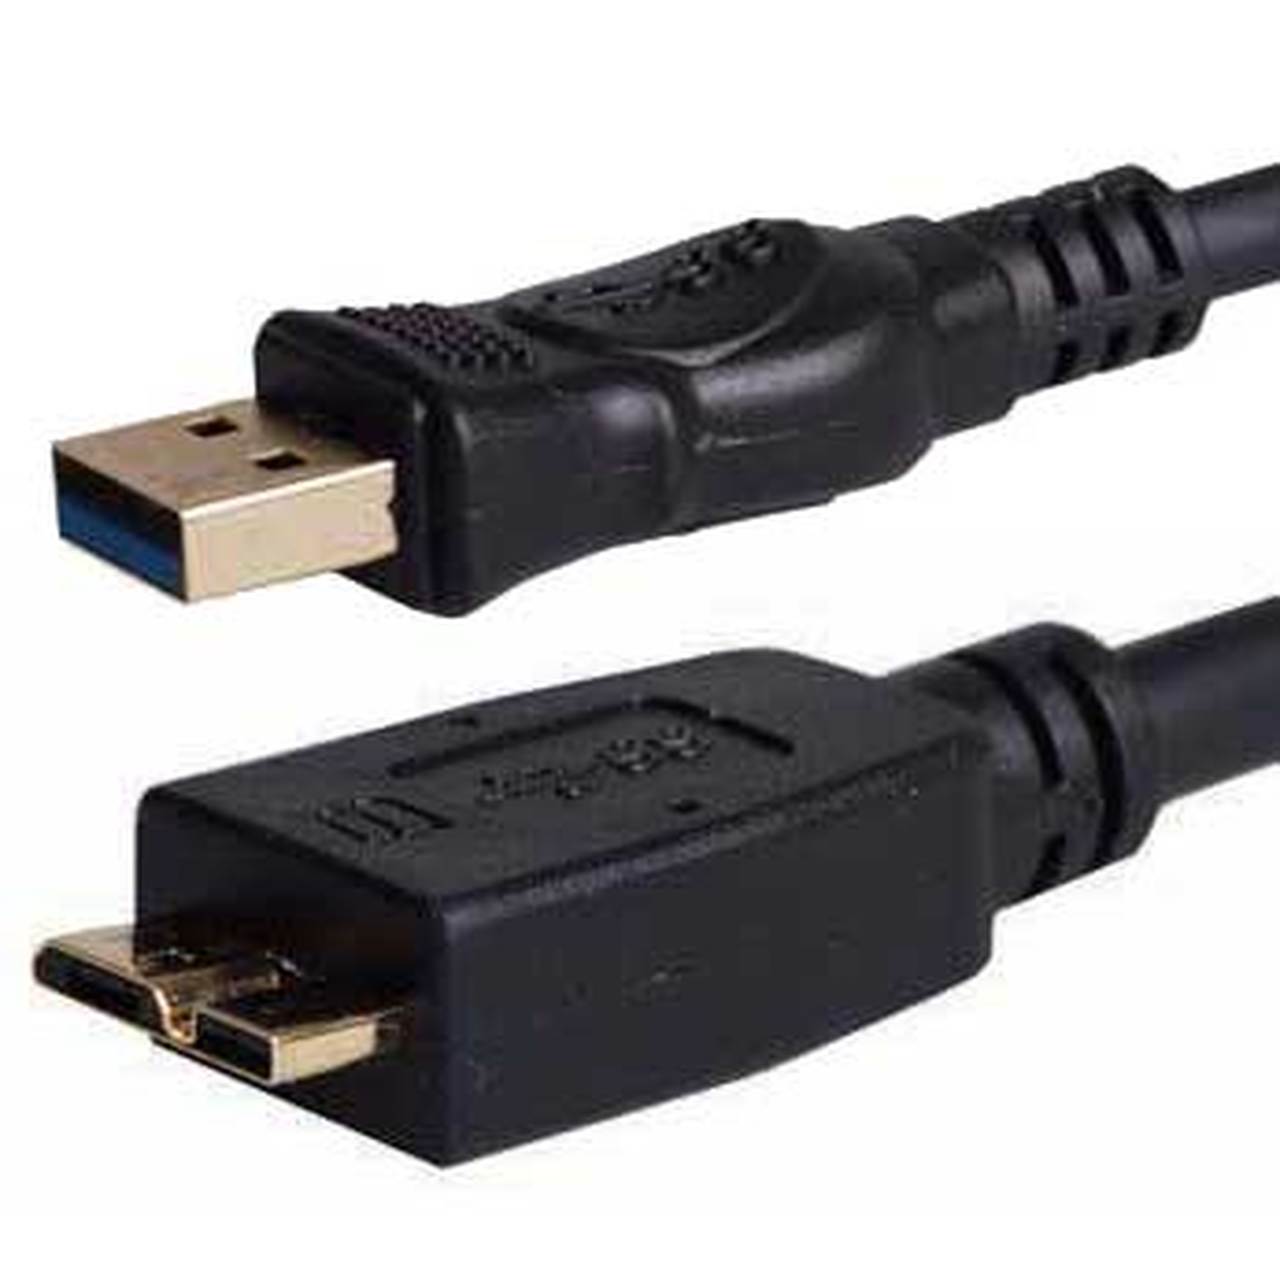 ProMaster 1475 Data Cable USB 3.0 24K gold plated (A male to MICRO B male) 6'